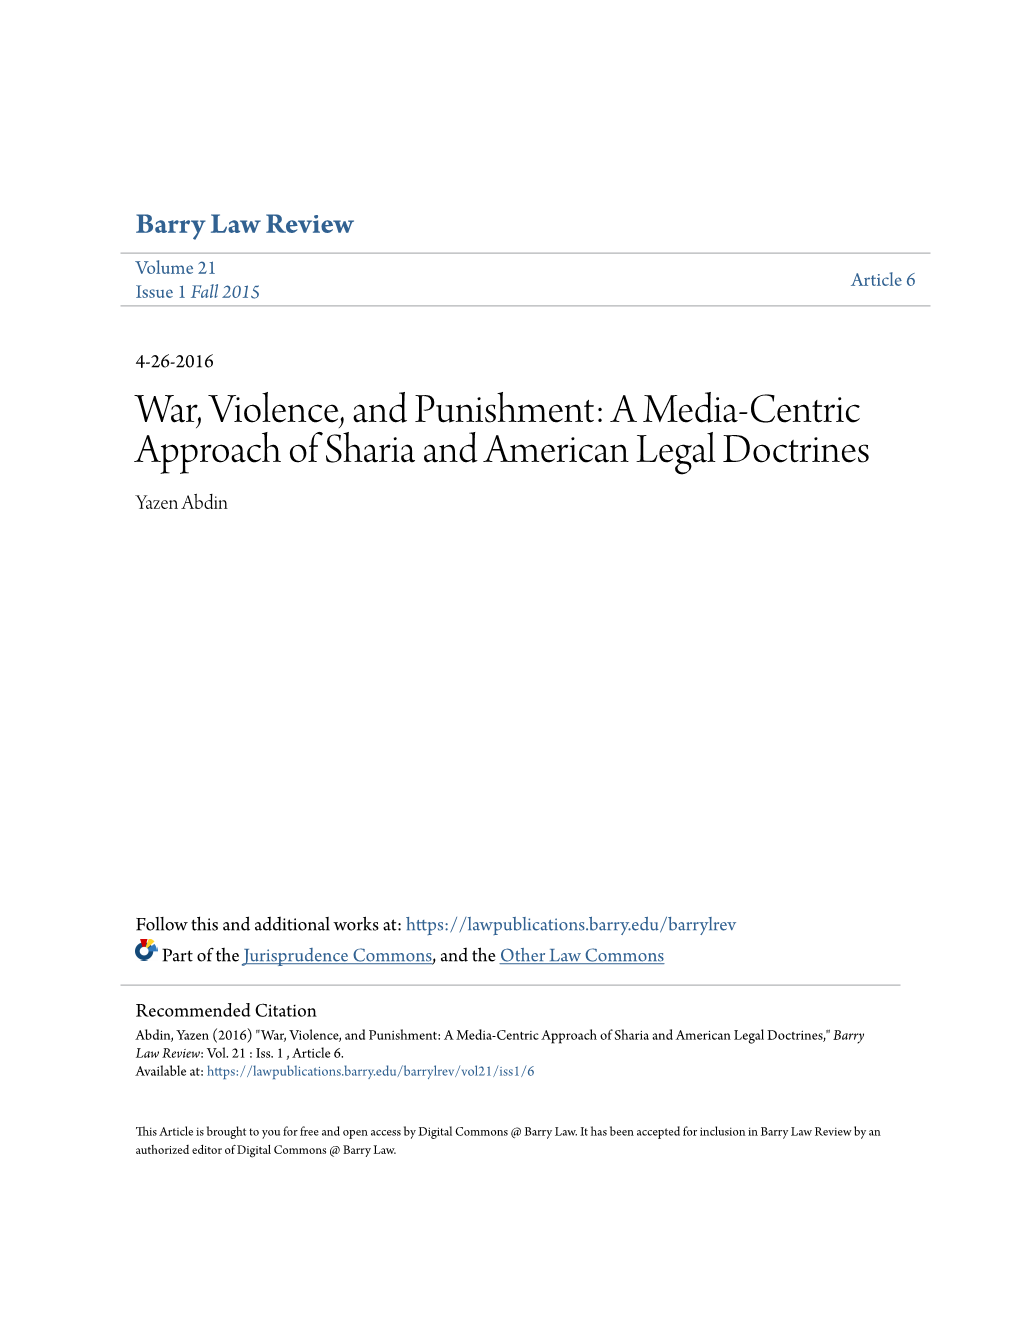 War, Violence, and Punishment: a Media-Centric Approach of Sharia and American Legal Doctrines Yazen Abdin